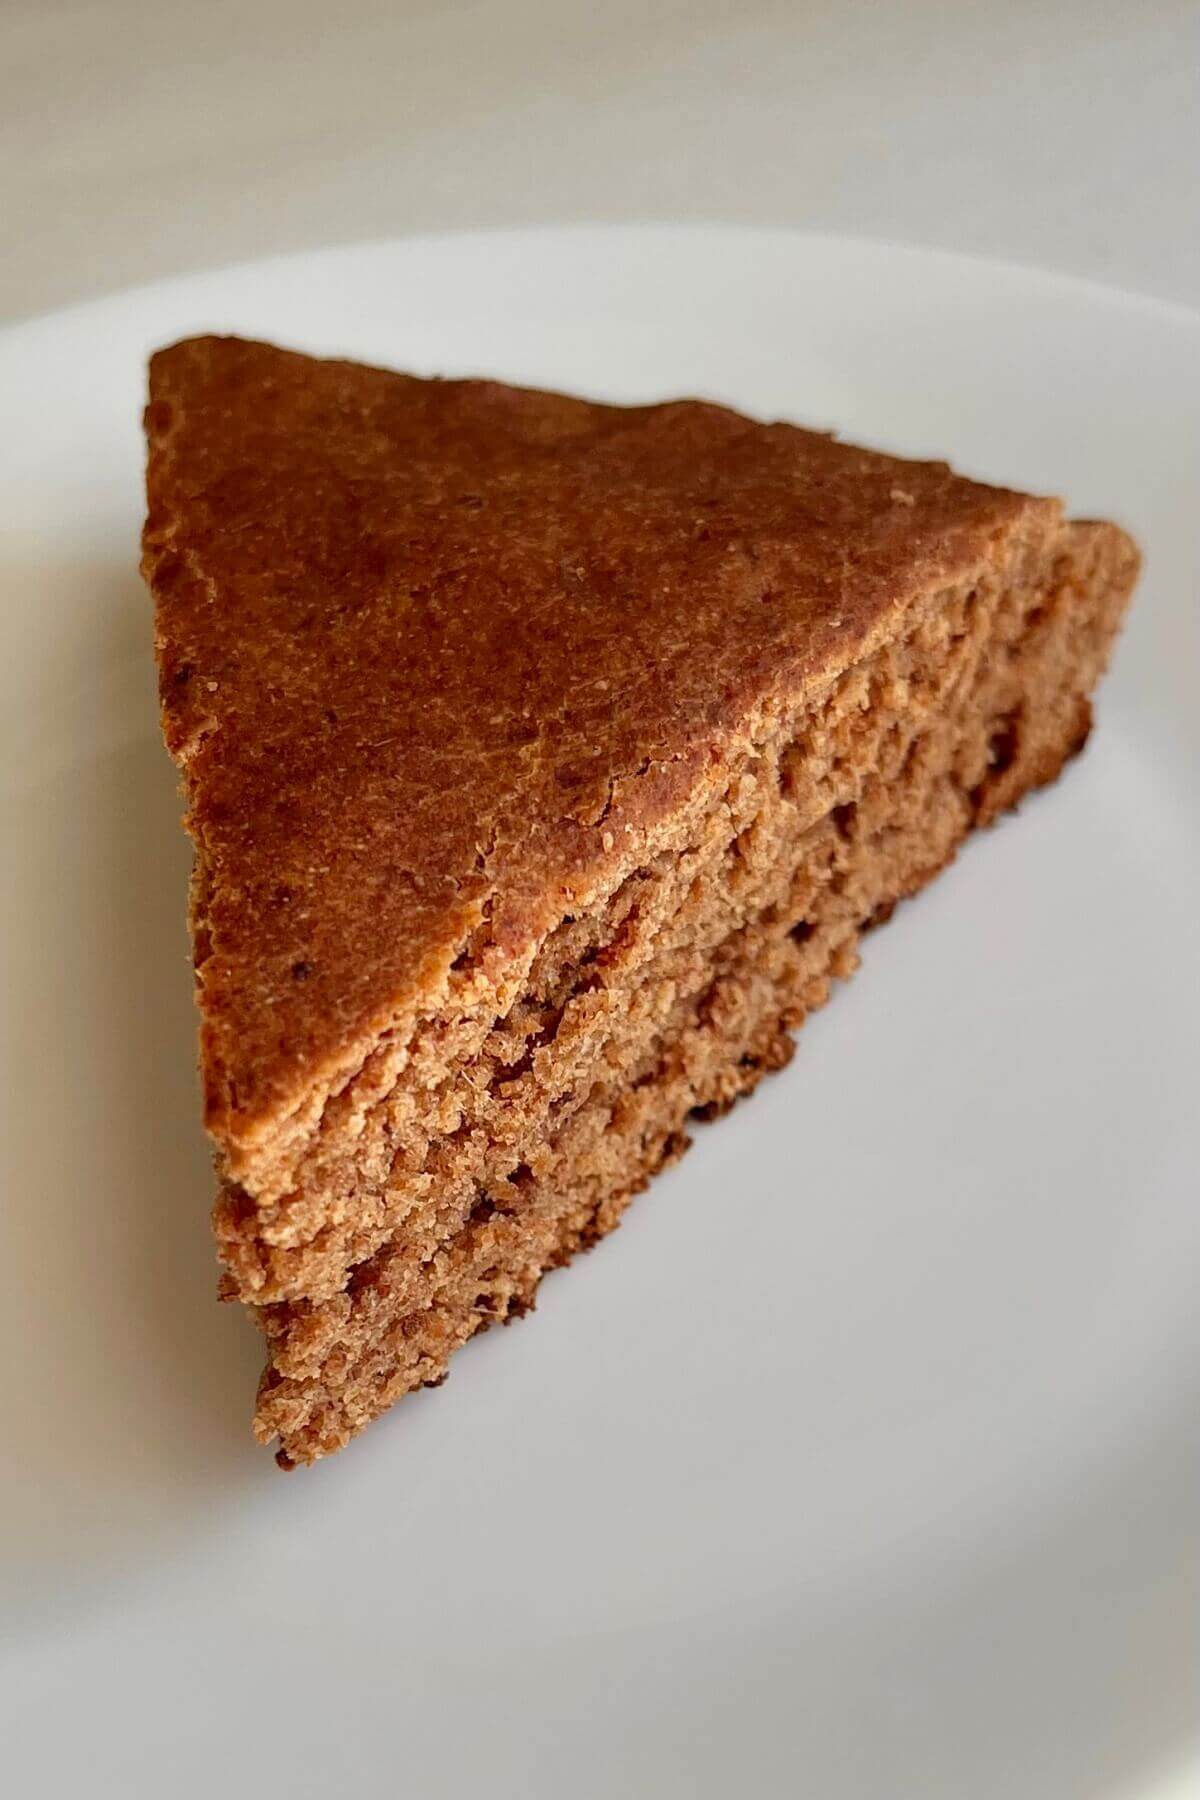 A slice of brown cake on a plate.